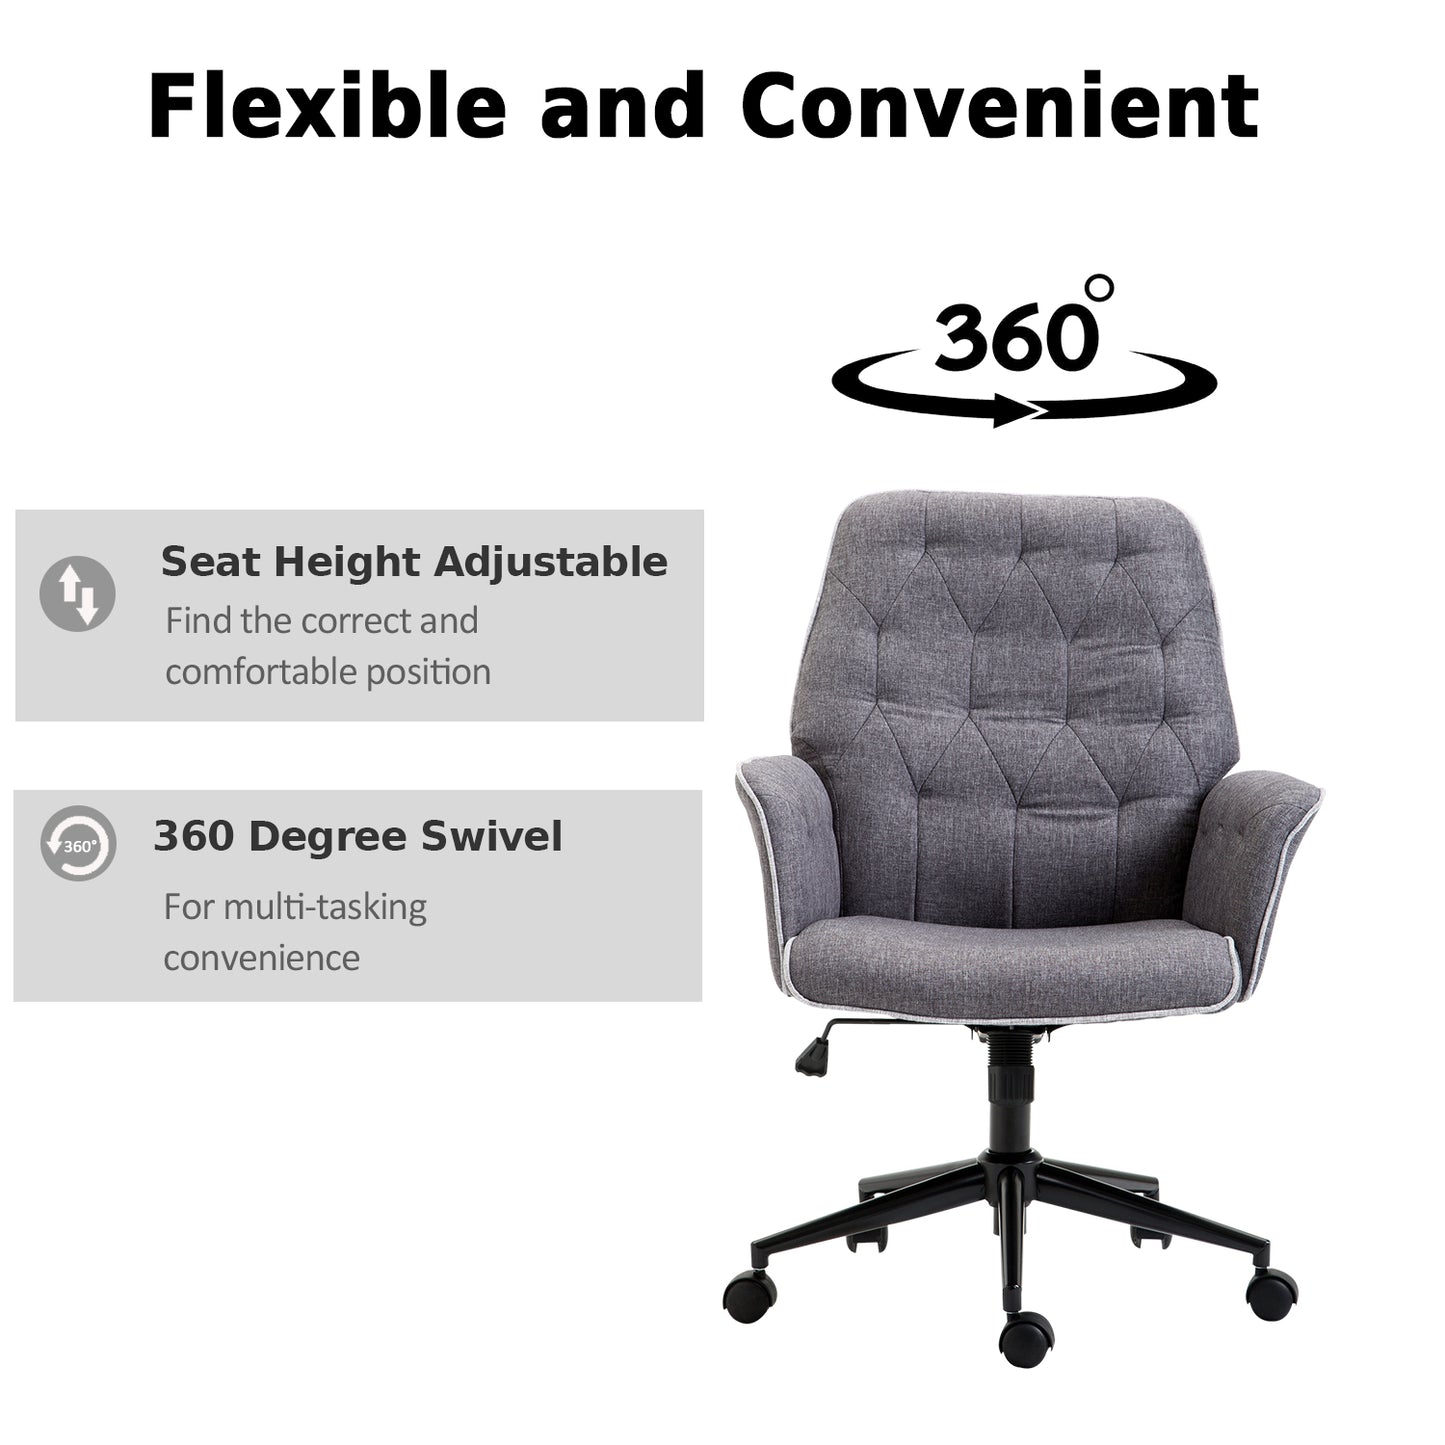 HOMCOM Linen-Feel Fabric Office Swivel Chair Mid Back Computer Desk Chair with Adjustable Seat, Arm - Grey